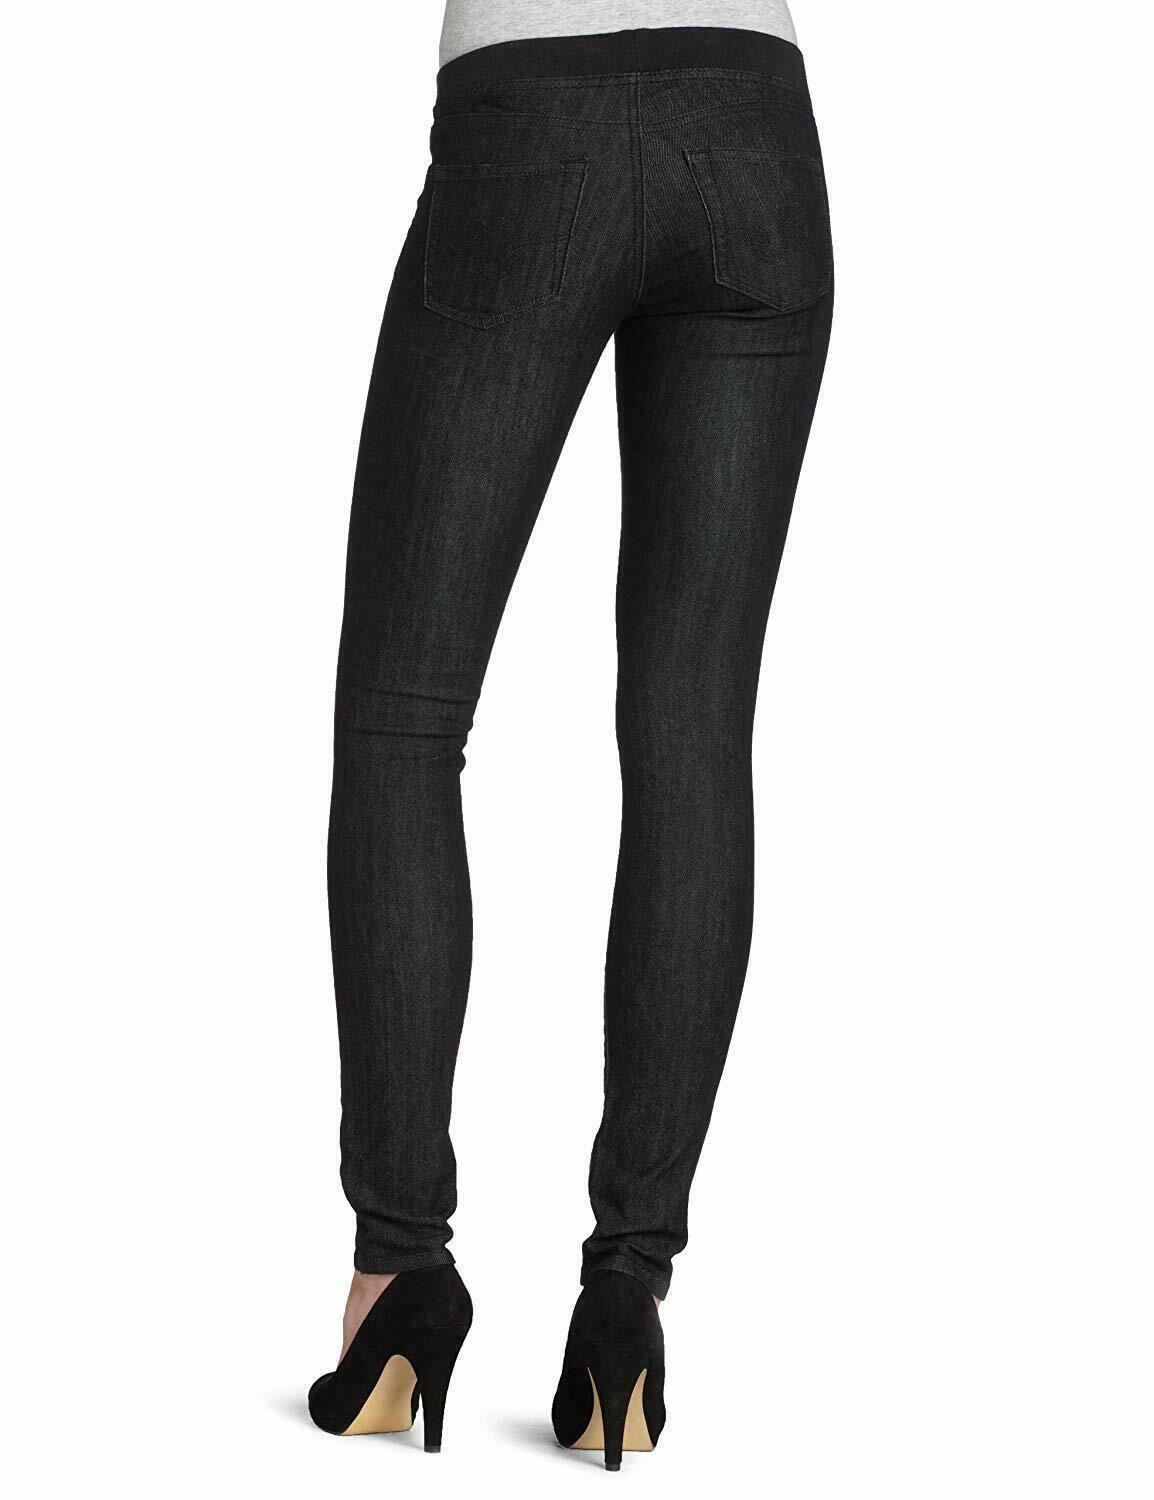 AG Adriano Goldschmied  SKB1298 The Tight Legging Jeans Property Black Size 27 - SVNYFancy